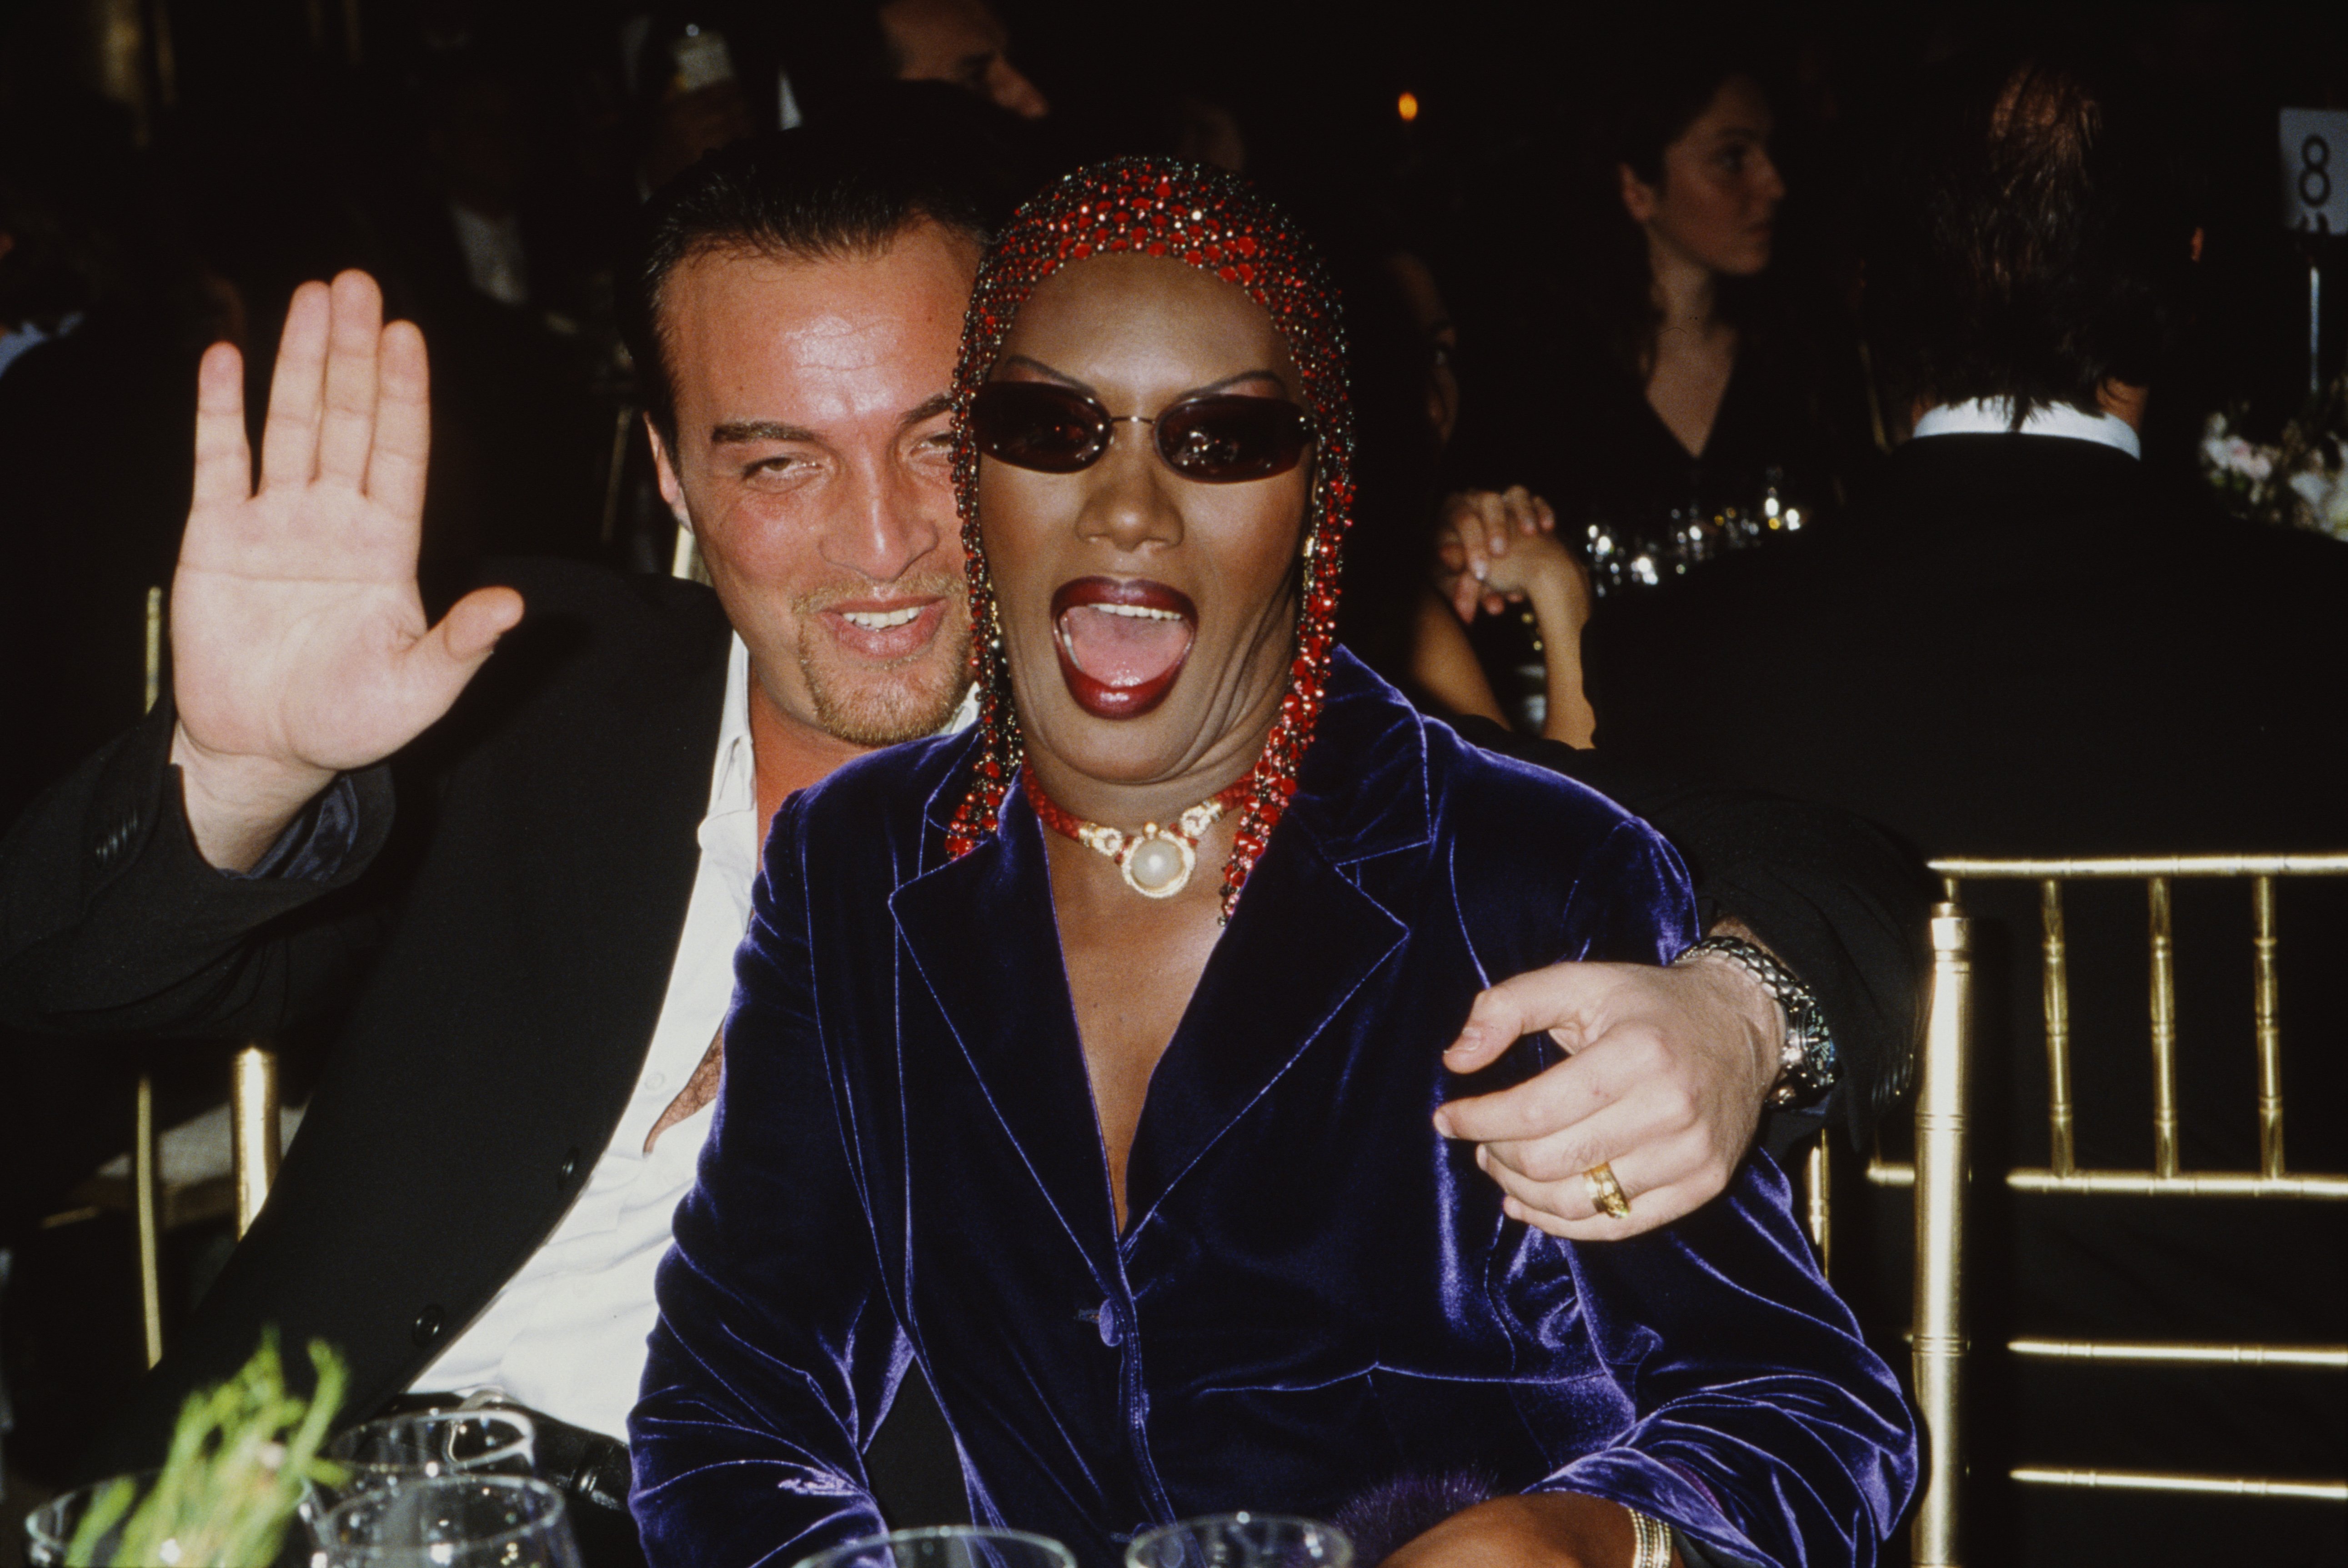 Grace Jones and Atila Altaunbay at Cipriani 42nd Street, New York City, 2000 | Source: Getty Images